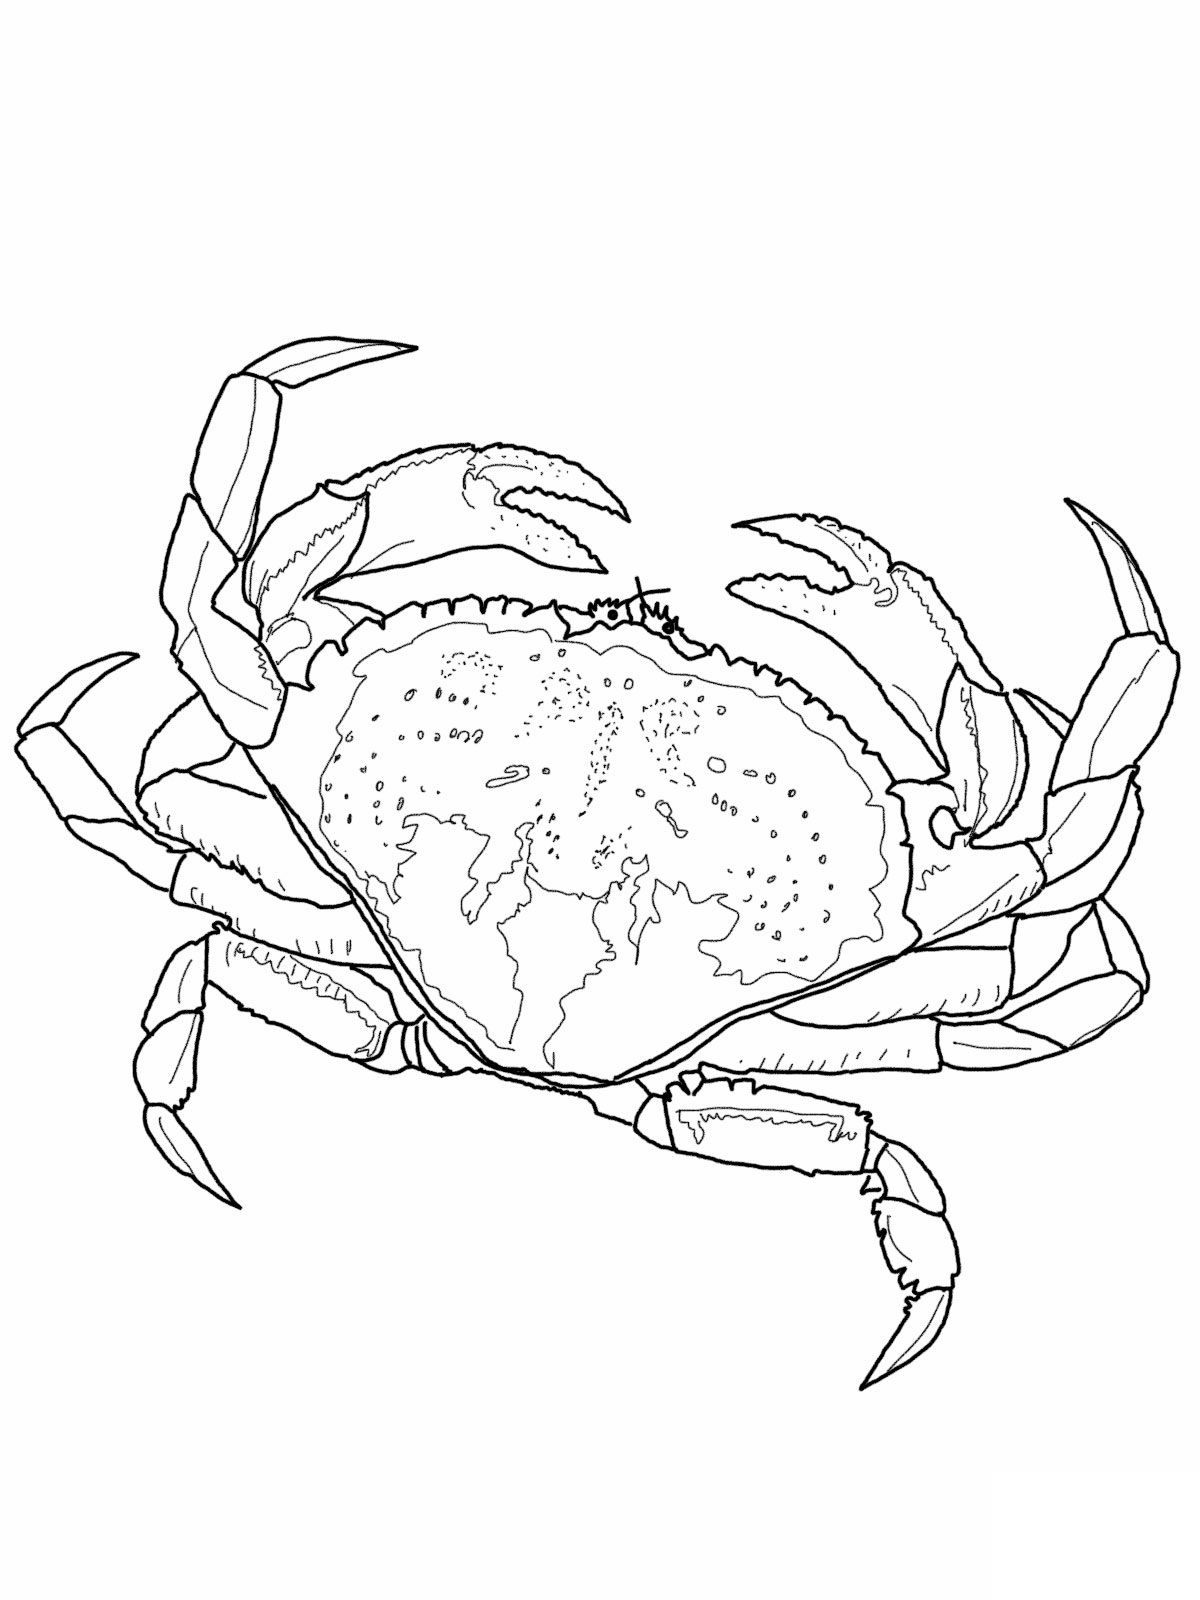 Free printable crab coloring pages for kids coloring pages crab art animal coloring pages